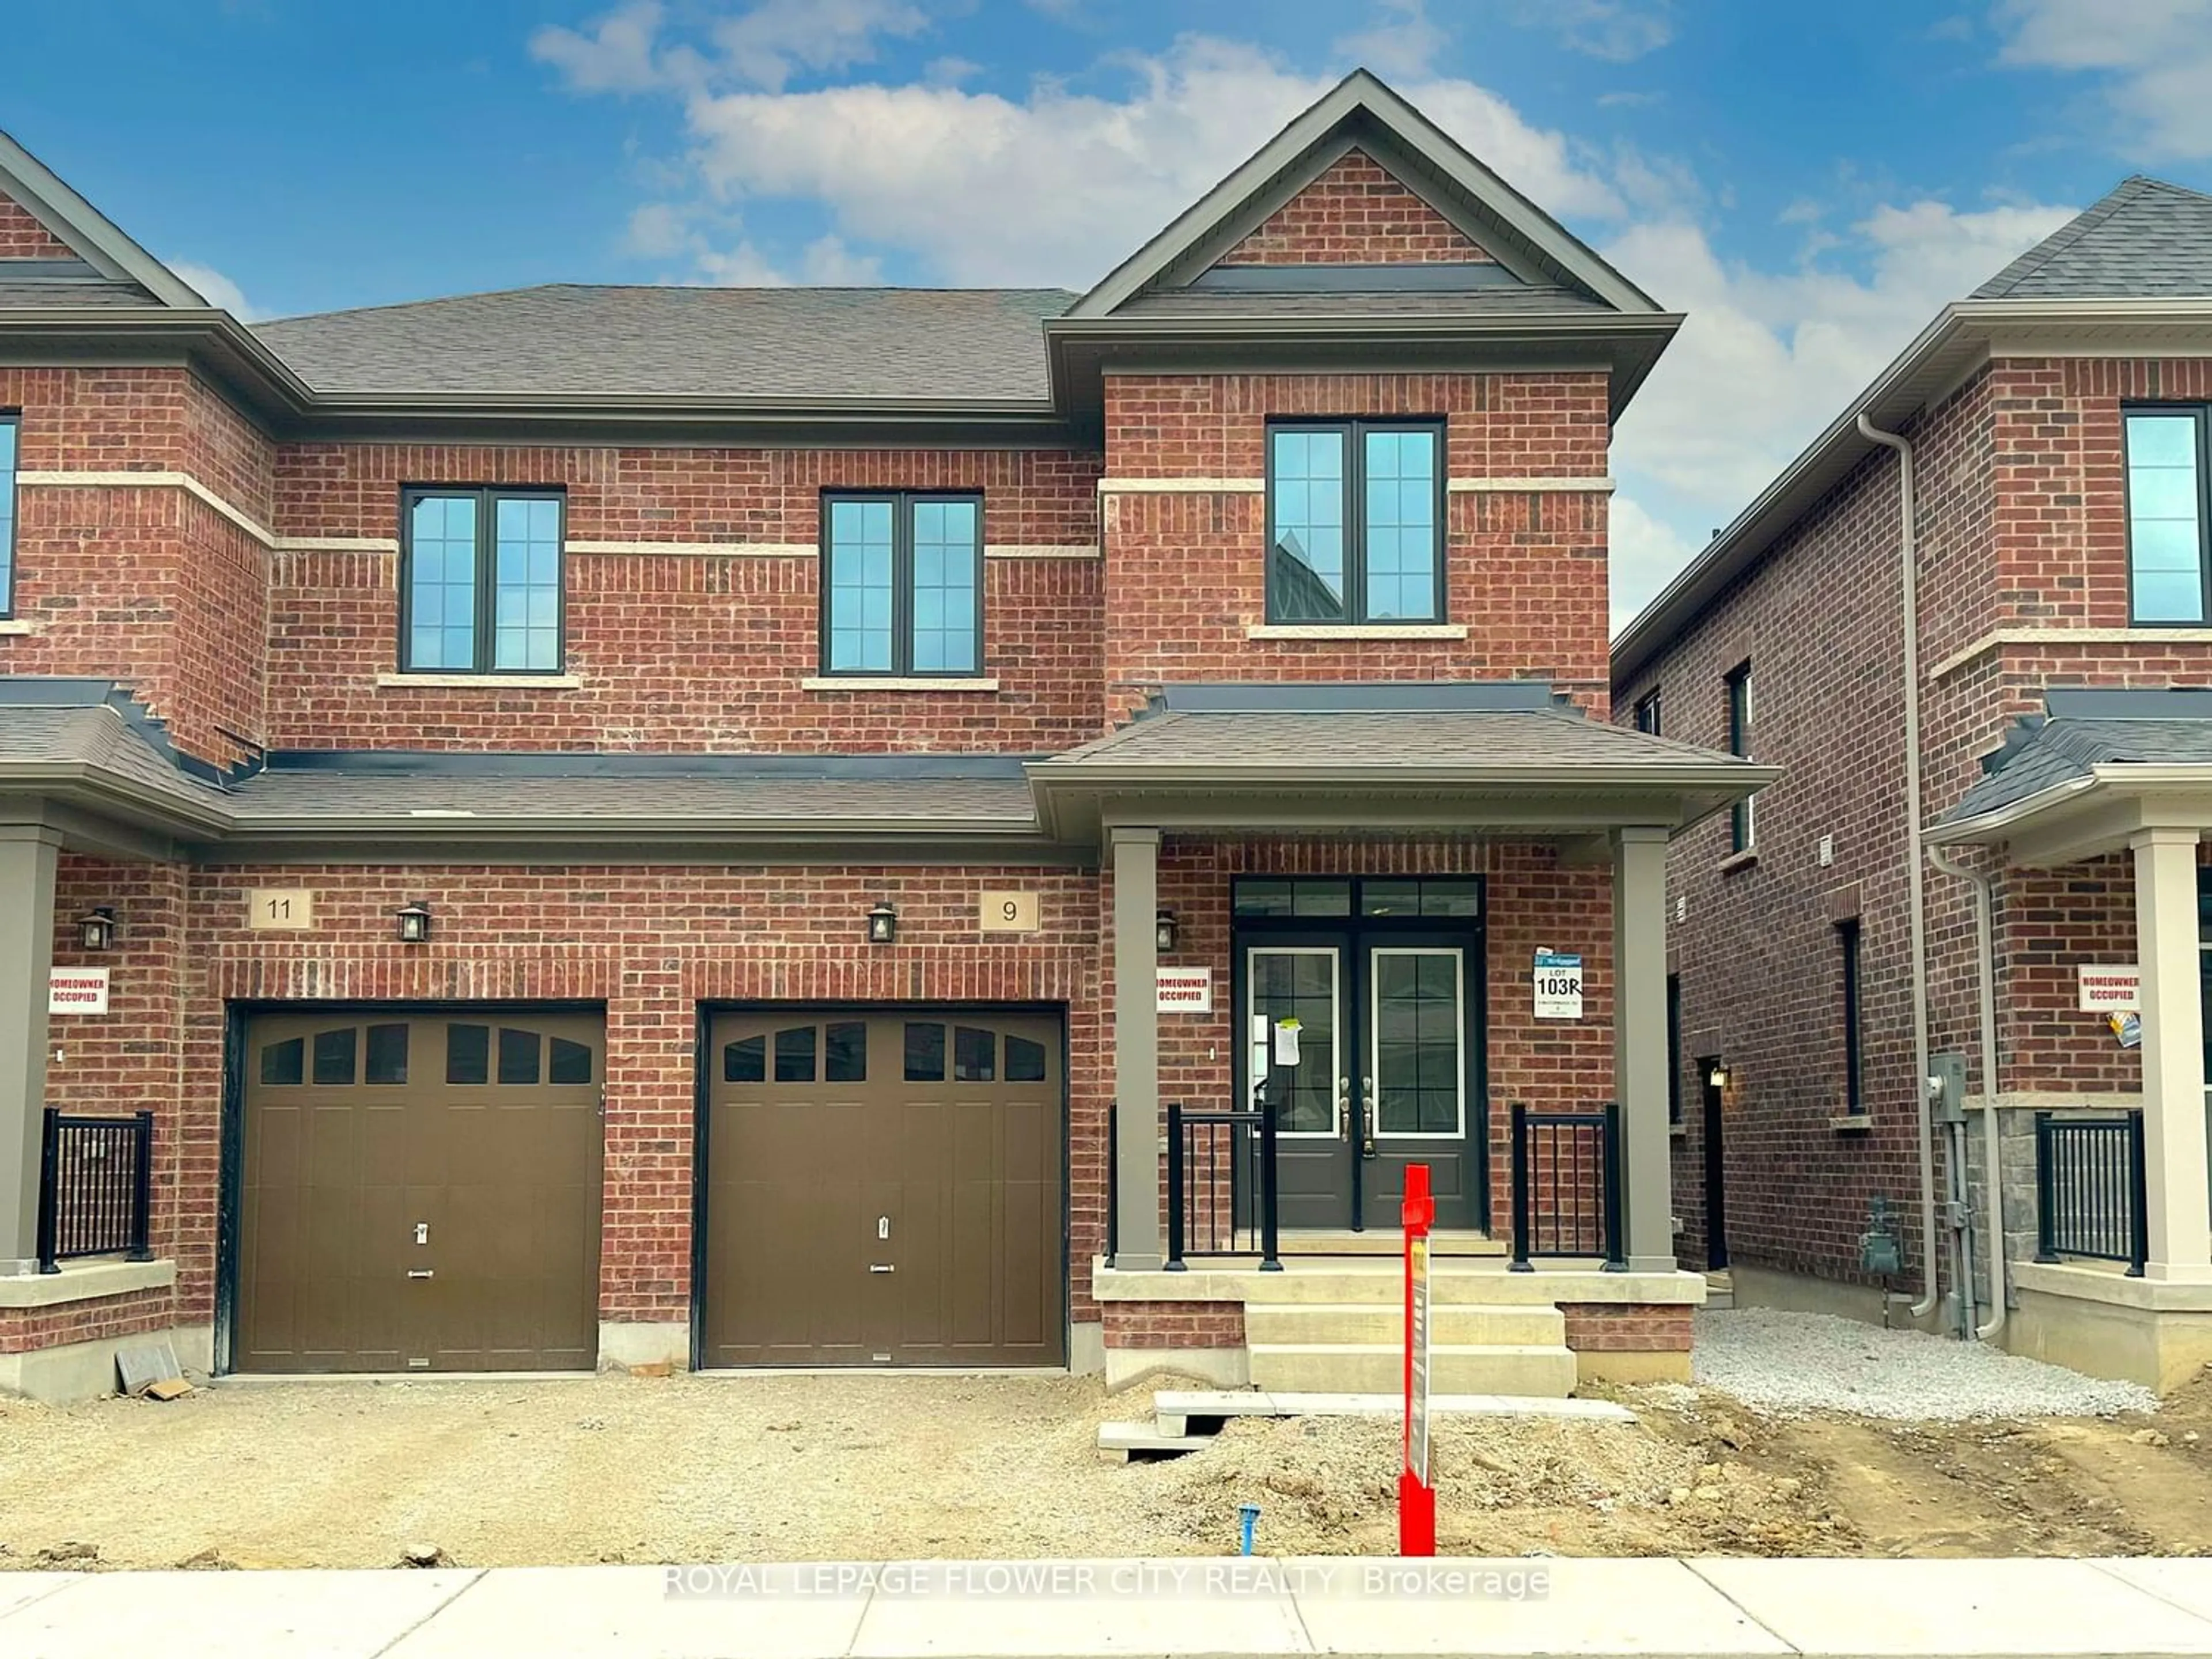 Home with brick exterior material for 9 Mccormack Rd, Caledon Ontario L7C 4J6